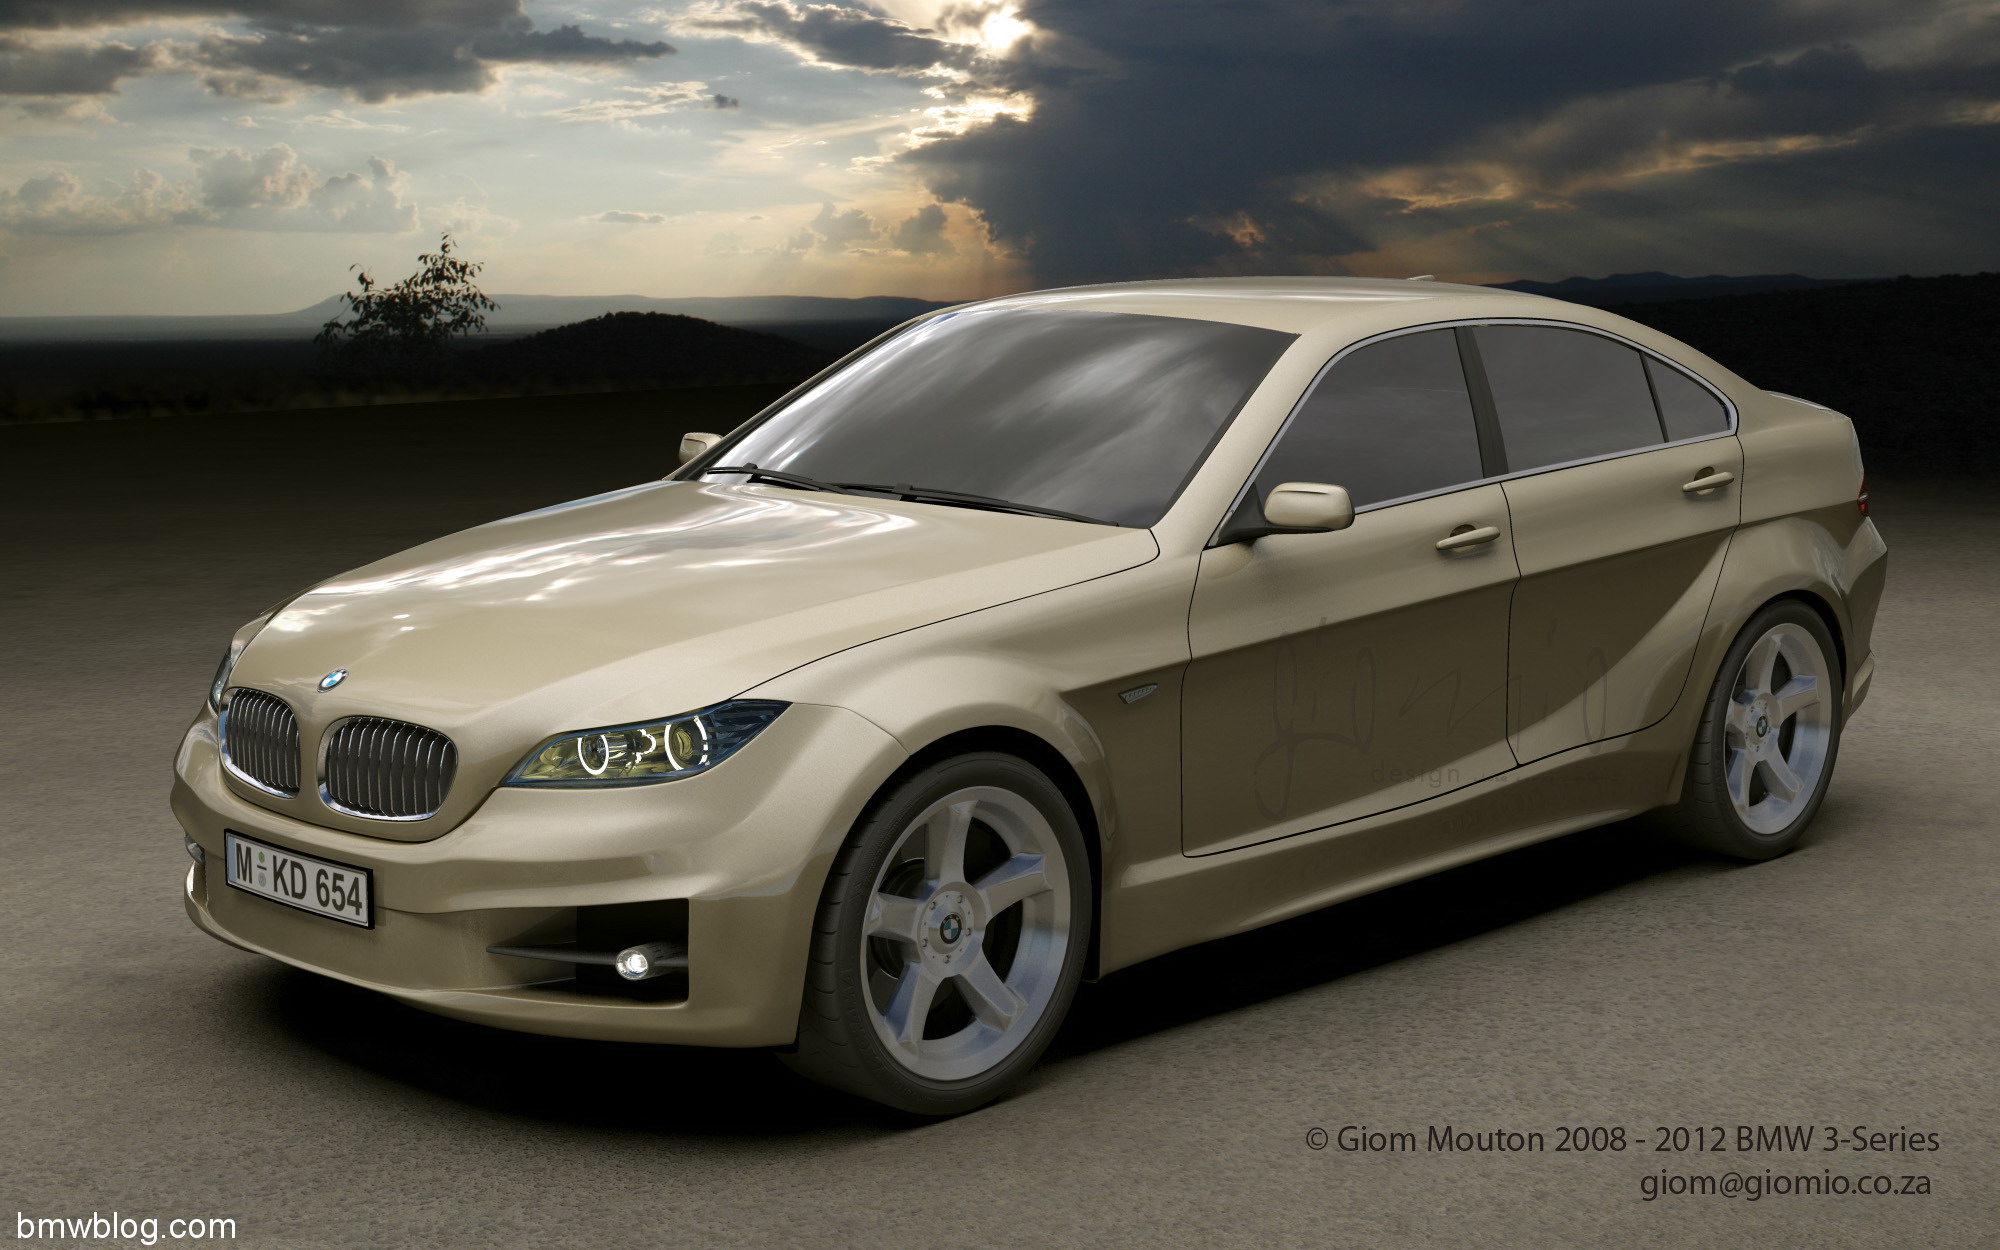  Coupe 335i on 3d View  2012 Bmw M6     2012 Bmw 3 Series     1 Series Concept